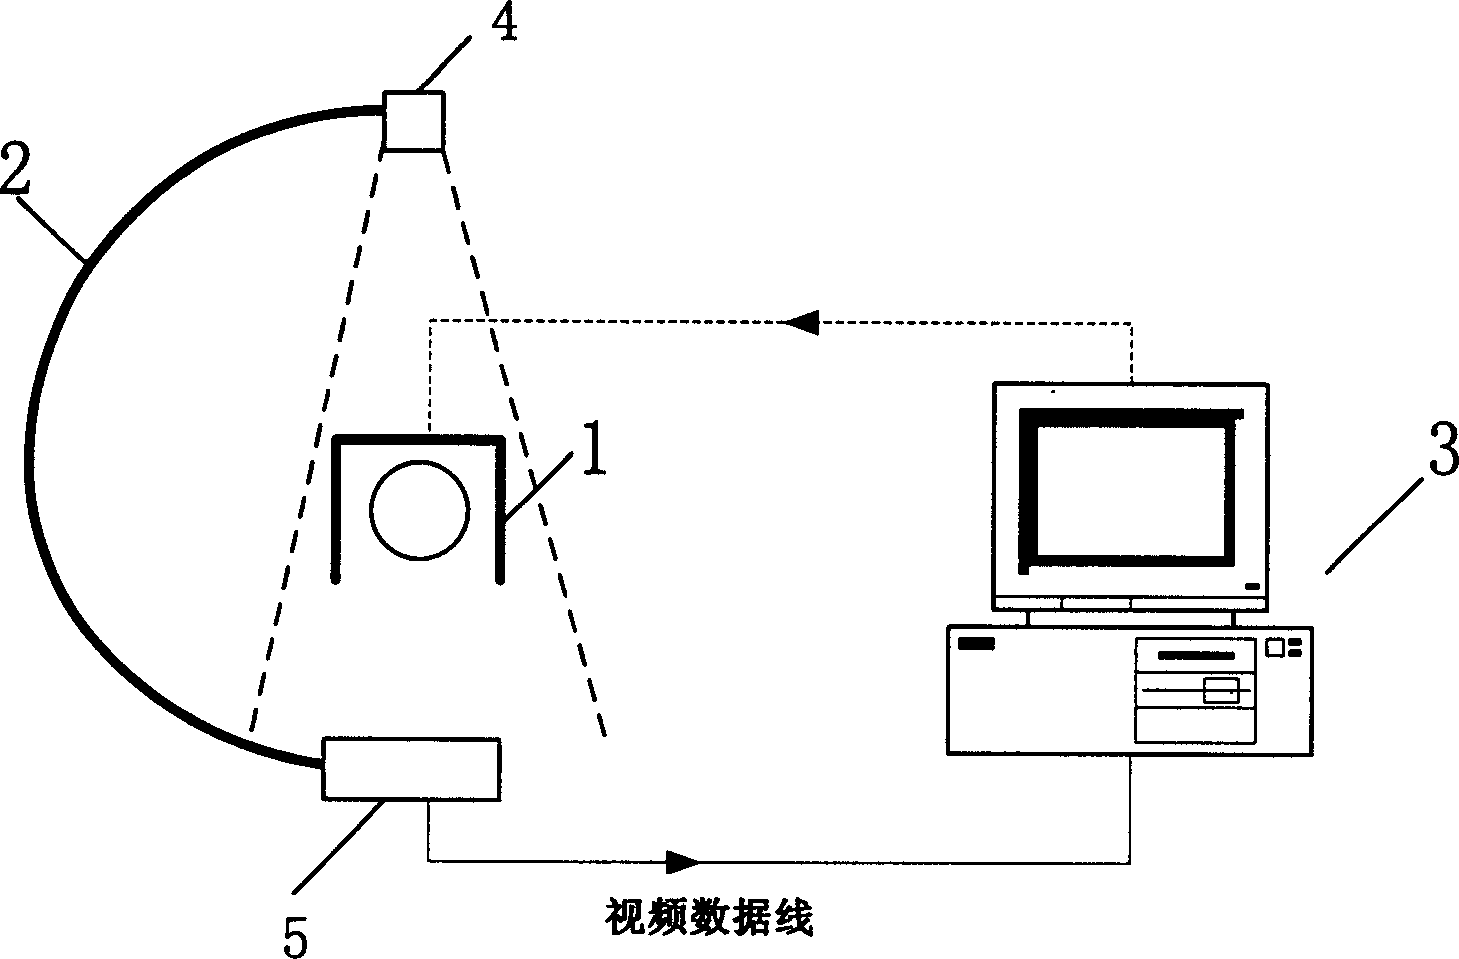 Computer aided system for locking far terminal of intramedullary nail